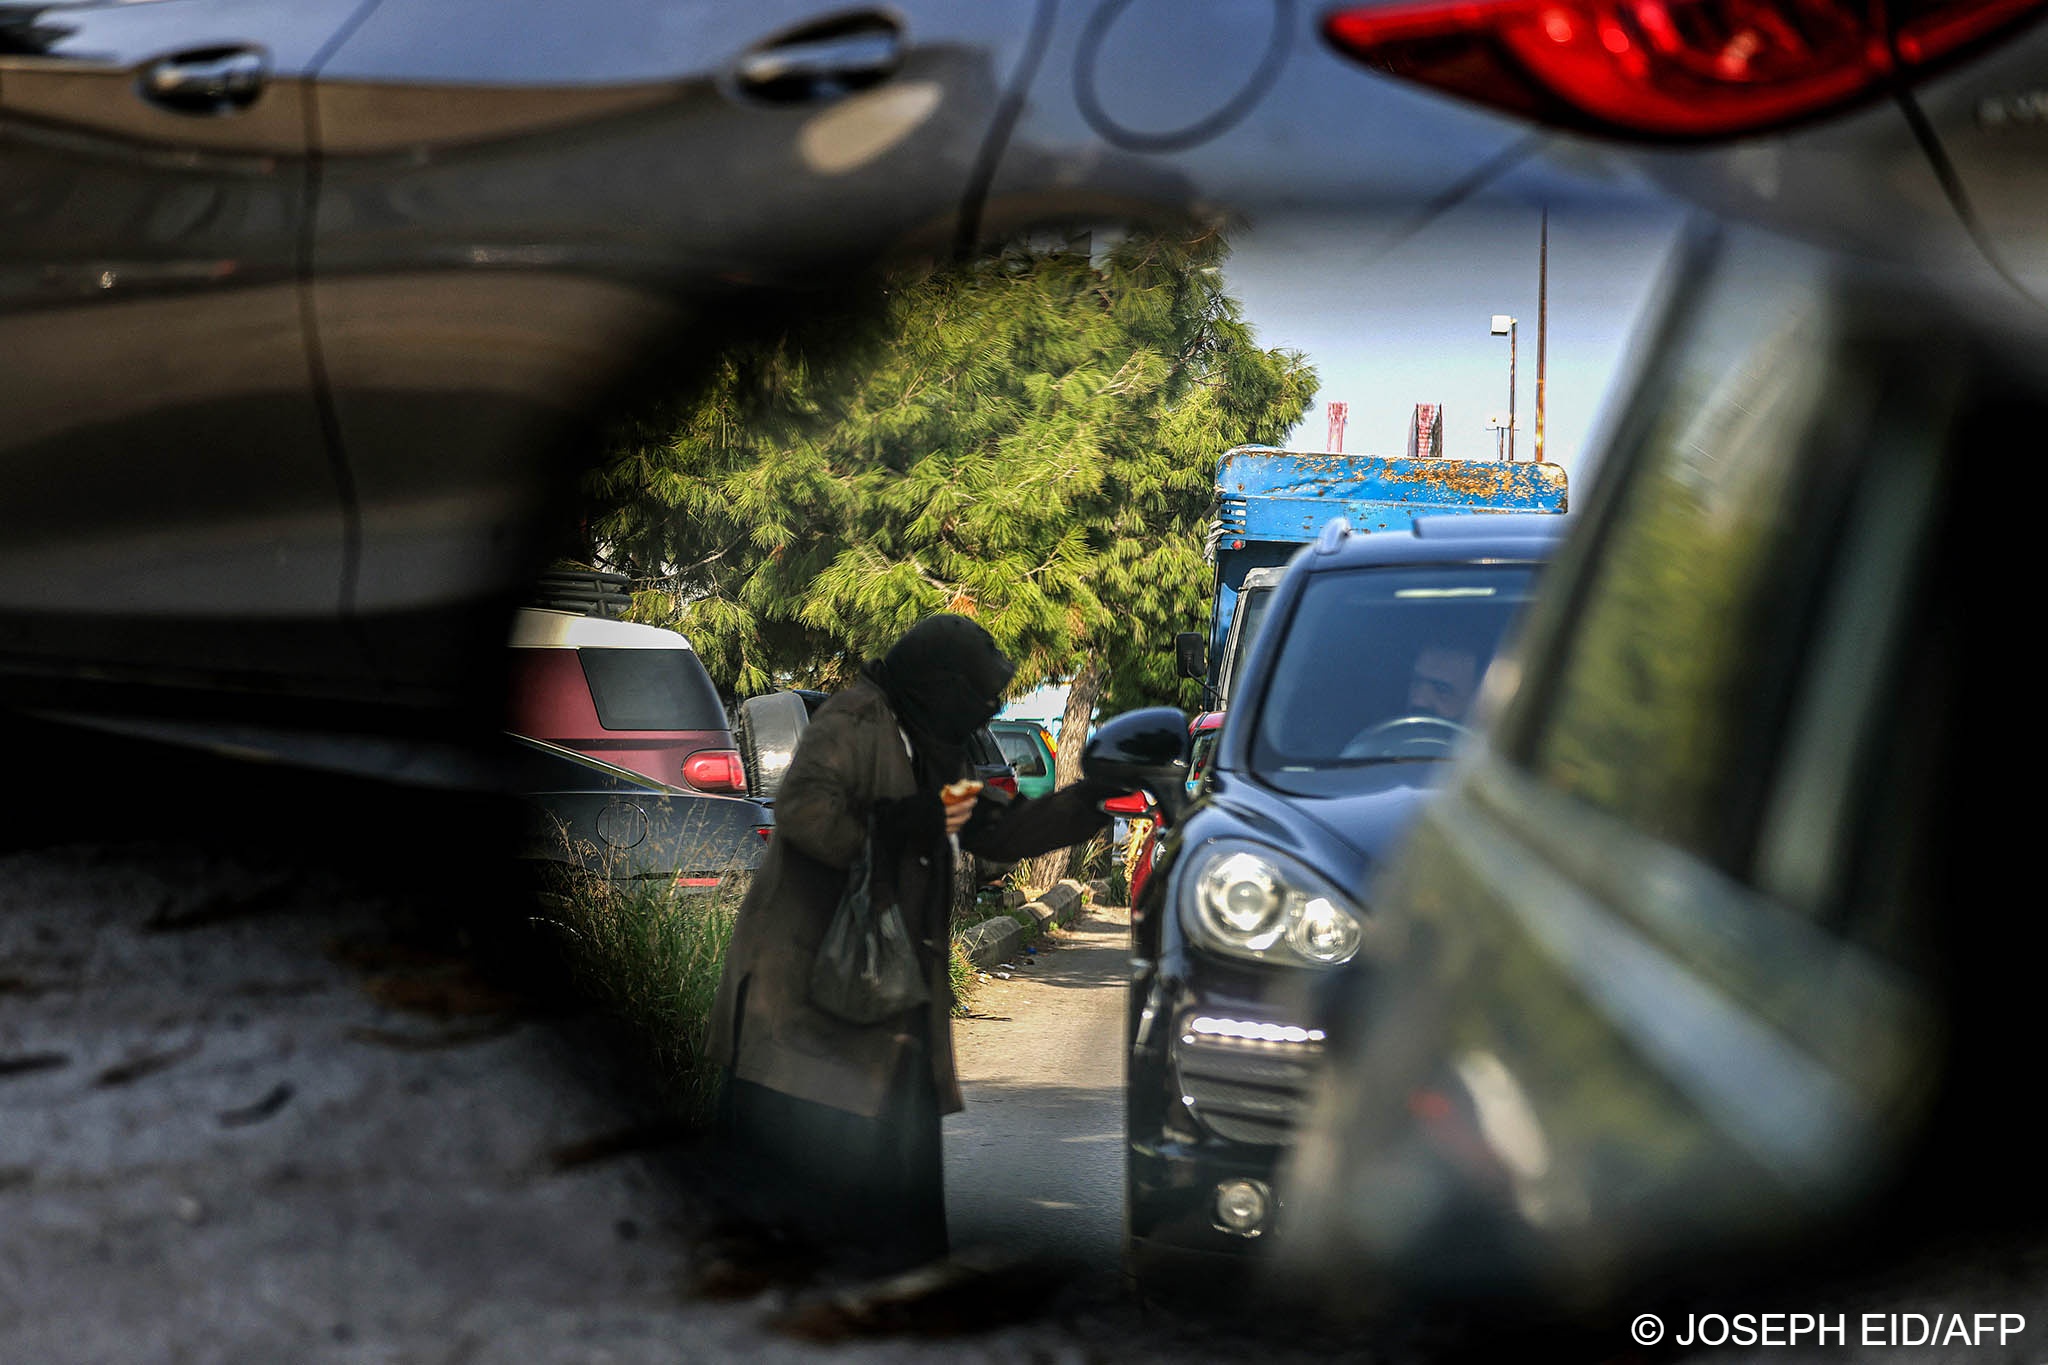  A woman begs a motorist for money in Beirut. Four out of five Lebanese are now considered poor, according to the UN income threshold of two dollars a day (photo: Joseph Eid/AFP) 